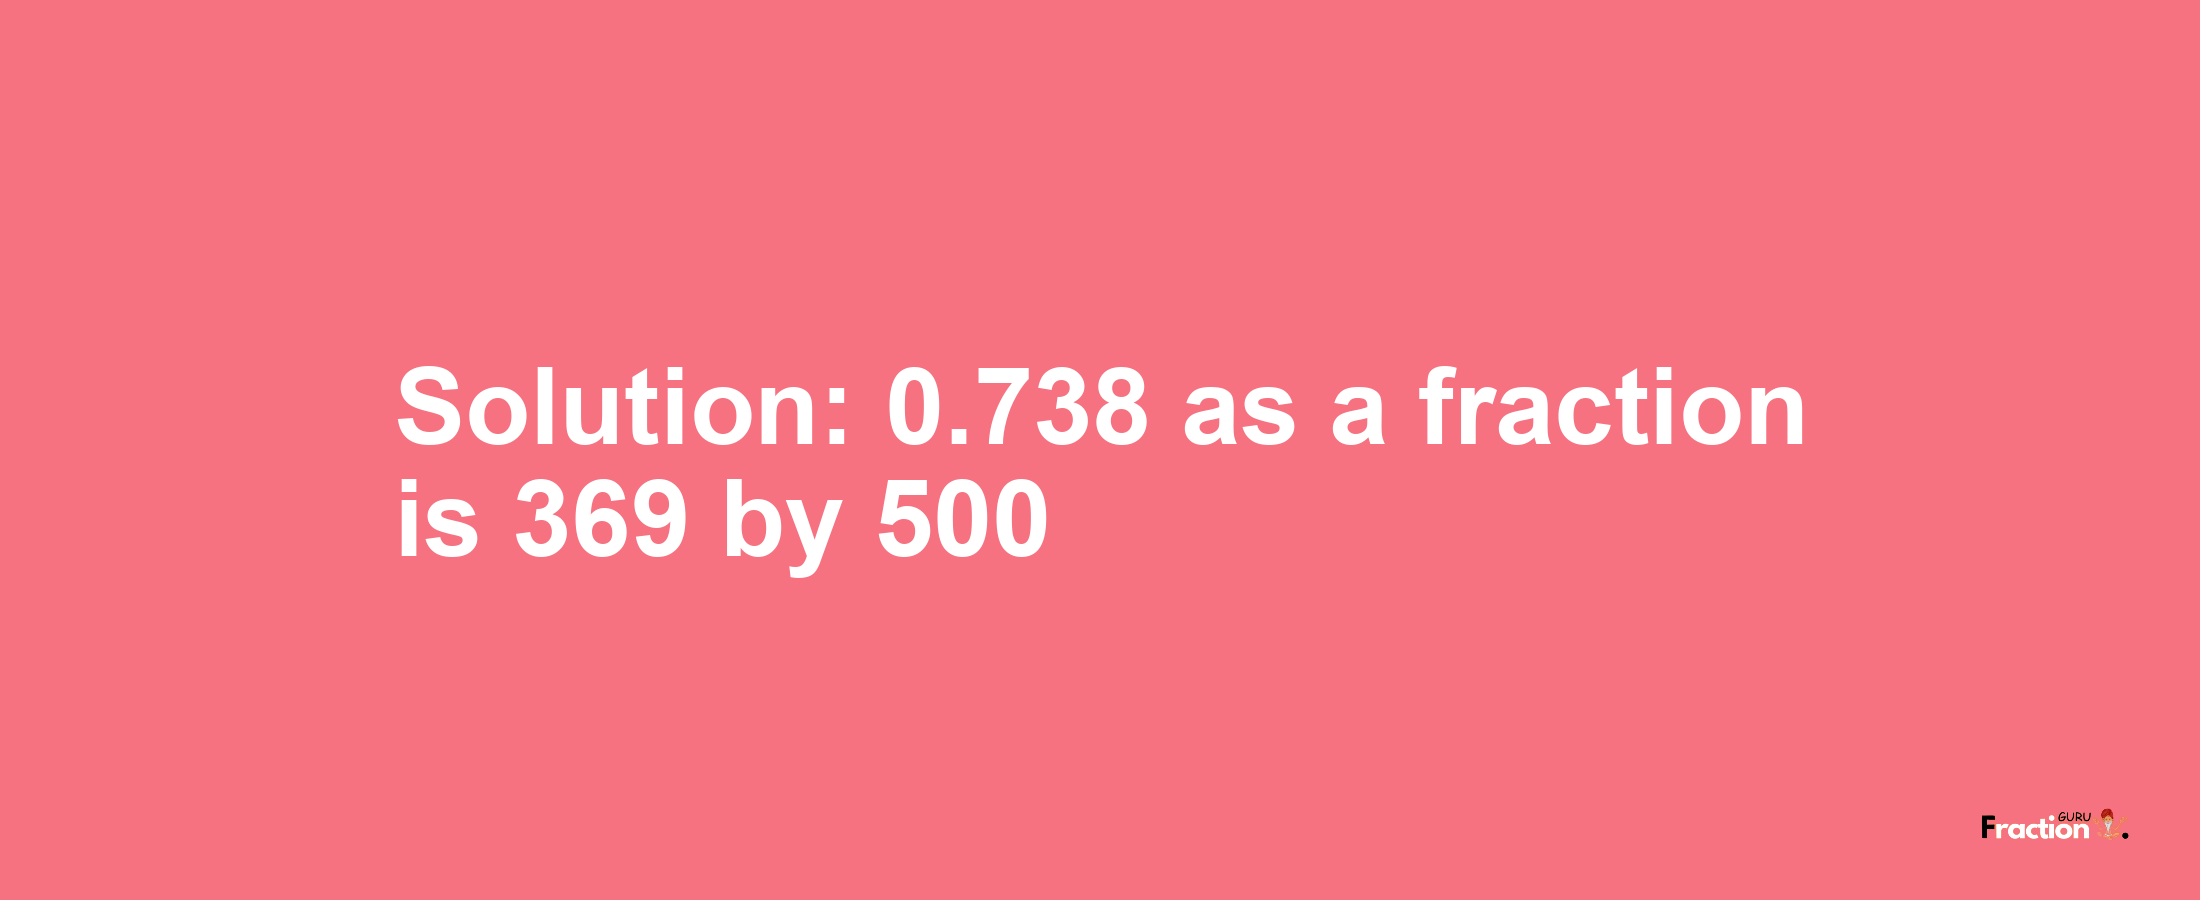 Solution:0.738 as a fraction is 369/500